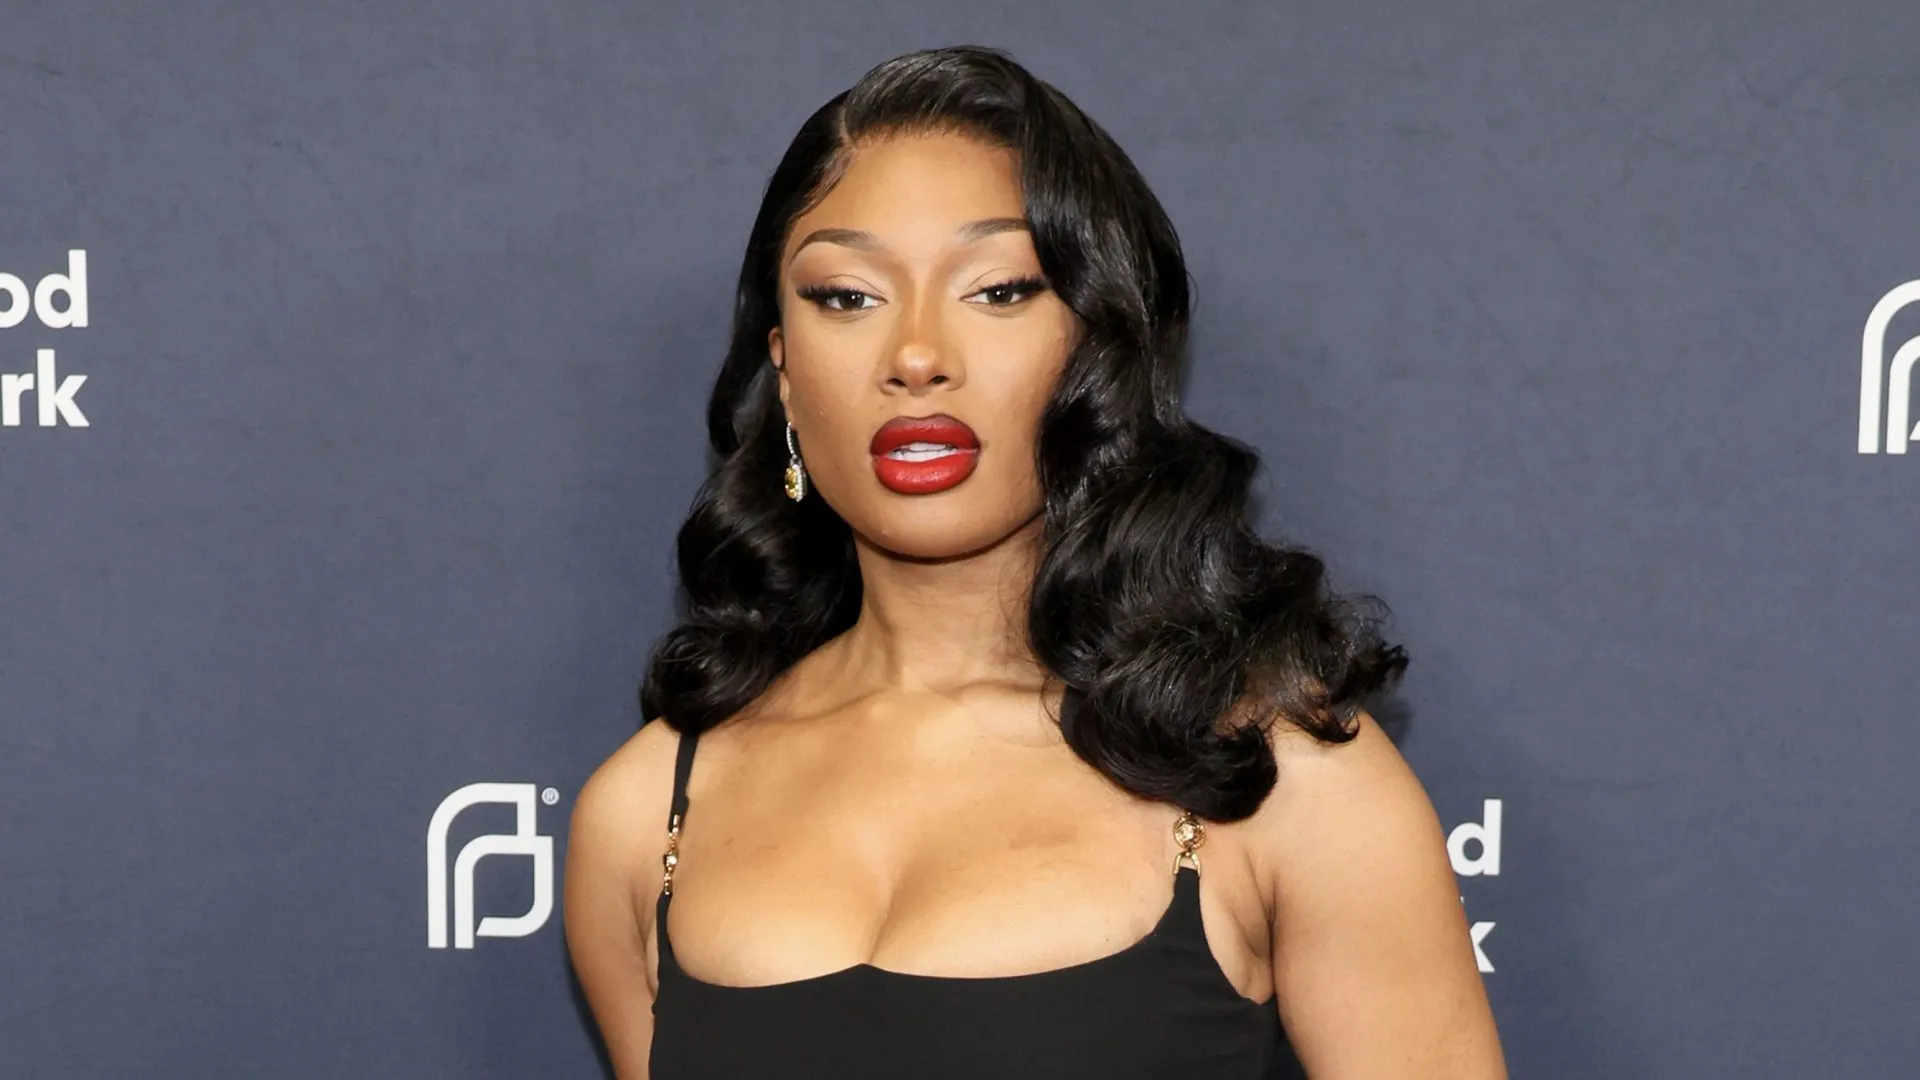 Megan Thee Stallion Faces Harassment Allegations from Cameraman Forced to Witness Intimate Encounter